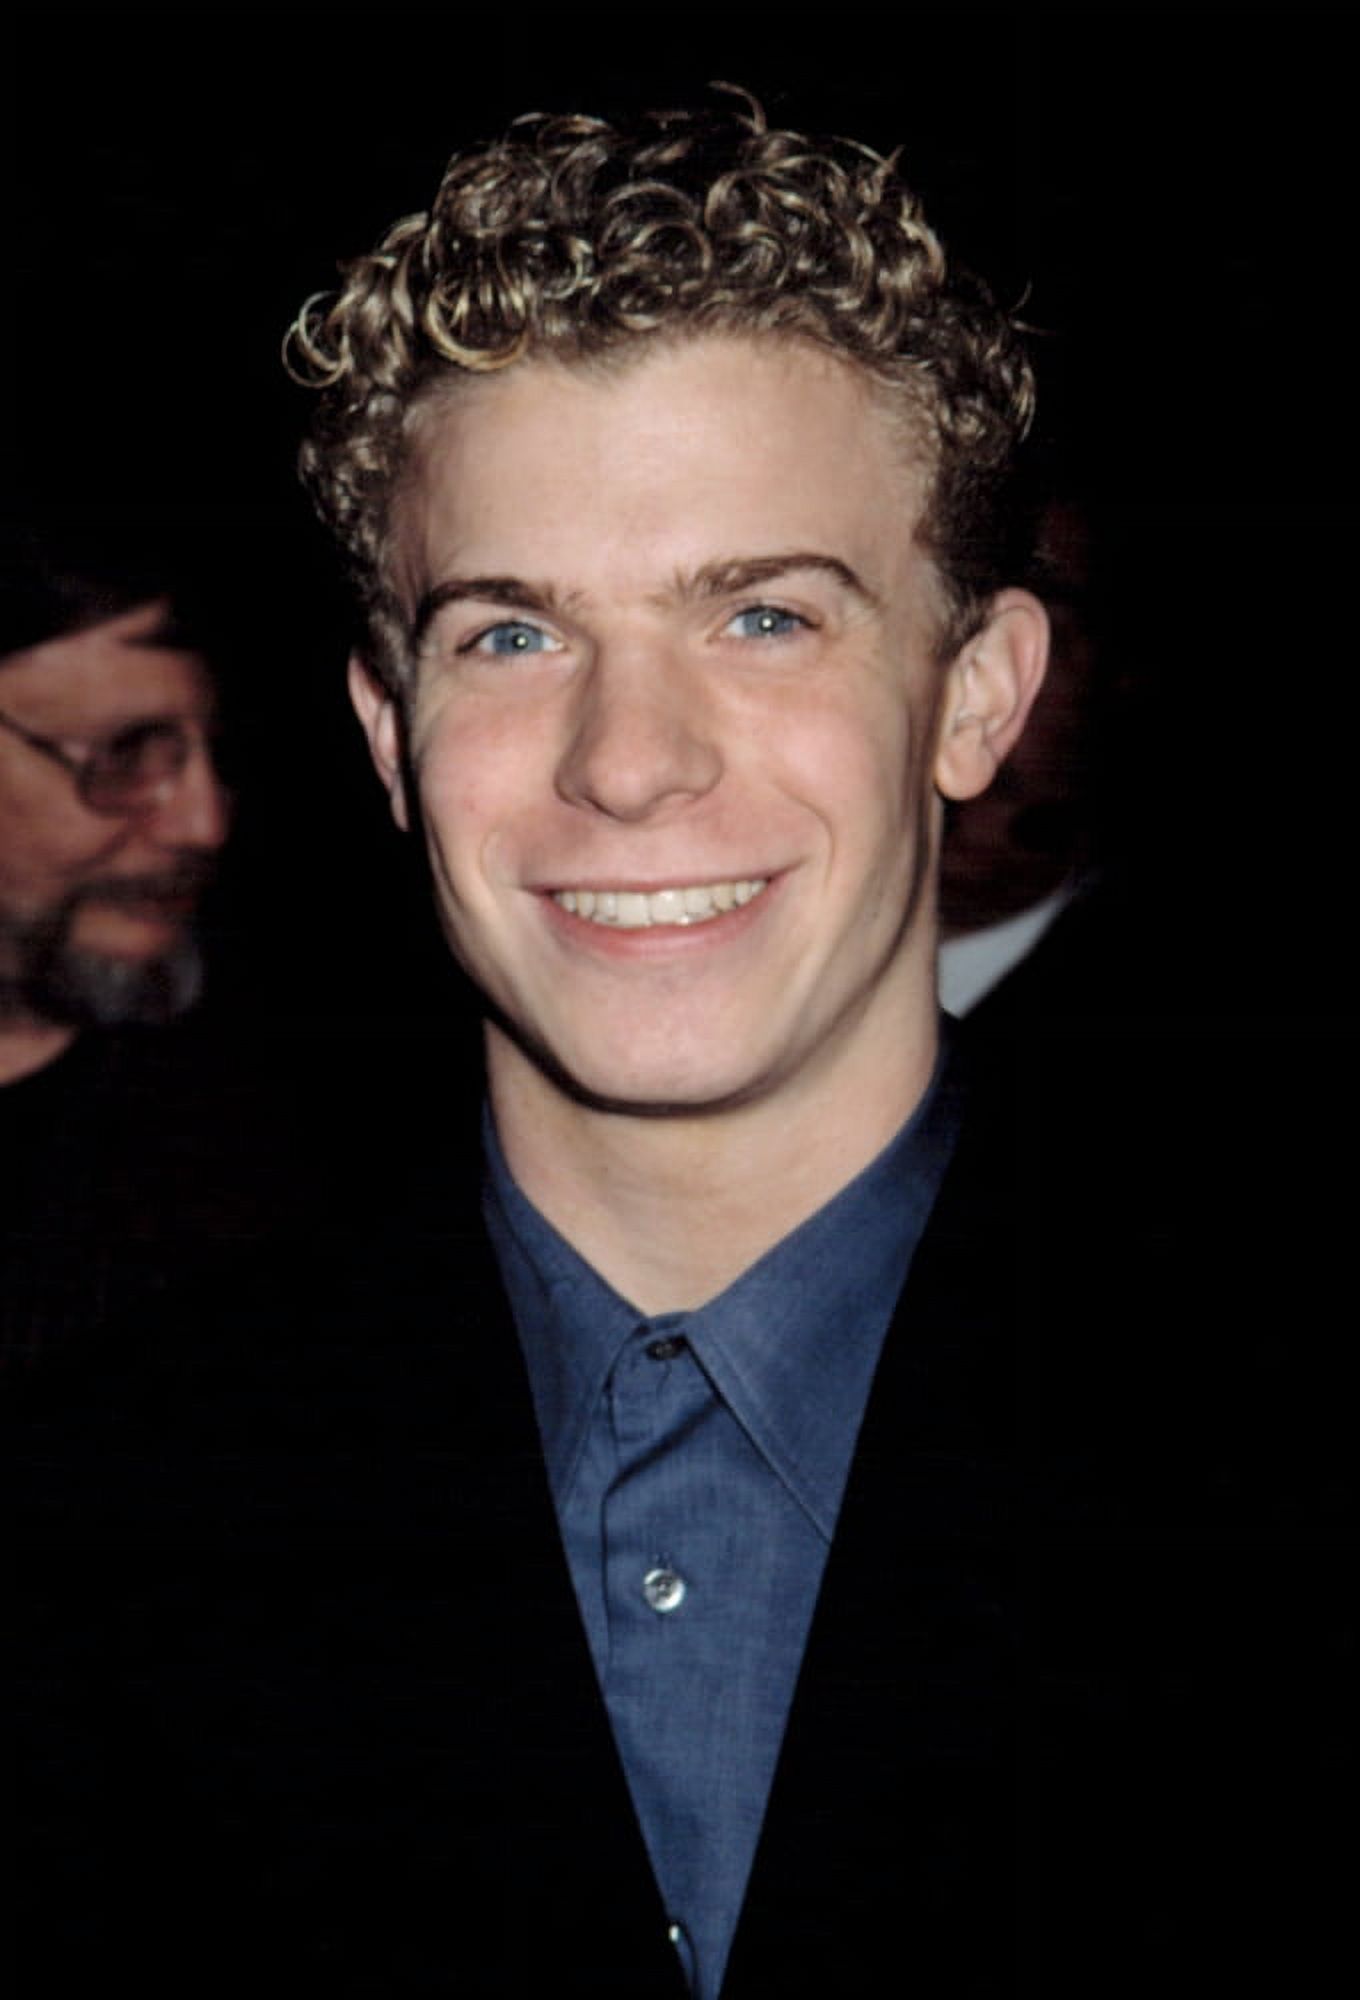 Timothy Goebel (Olympic Figure Skater) At Premiere Of The Rookie, Ny 3262002, By Cj Contino Celebrity (16 x 20) - image 1 of 1